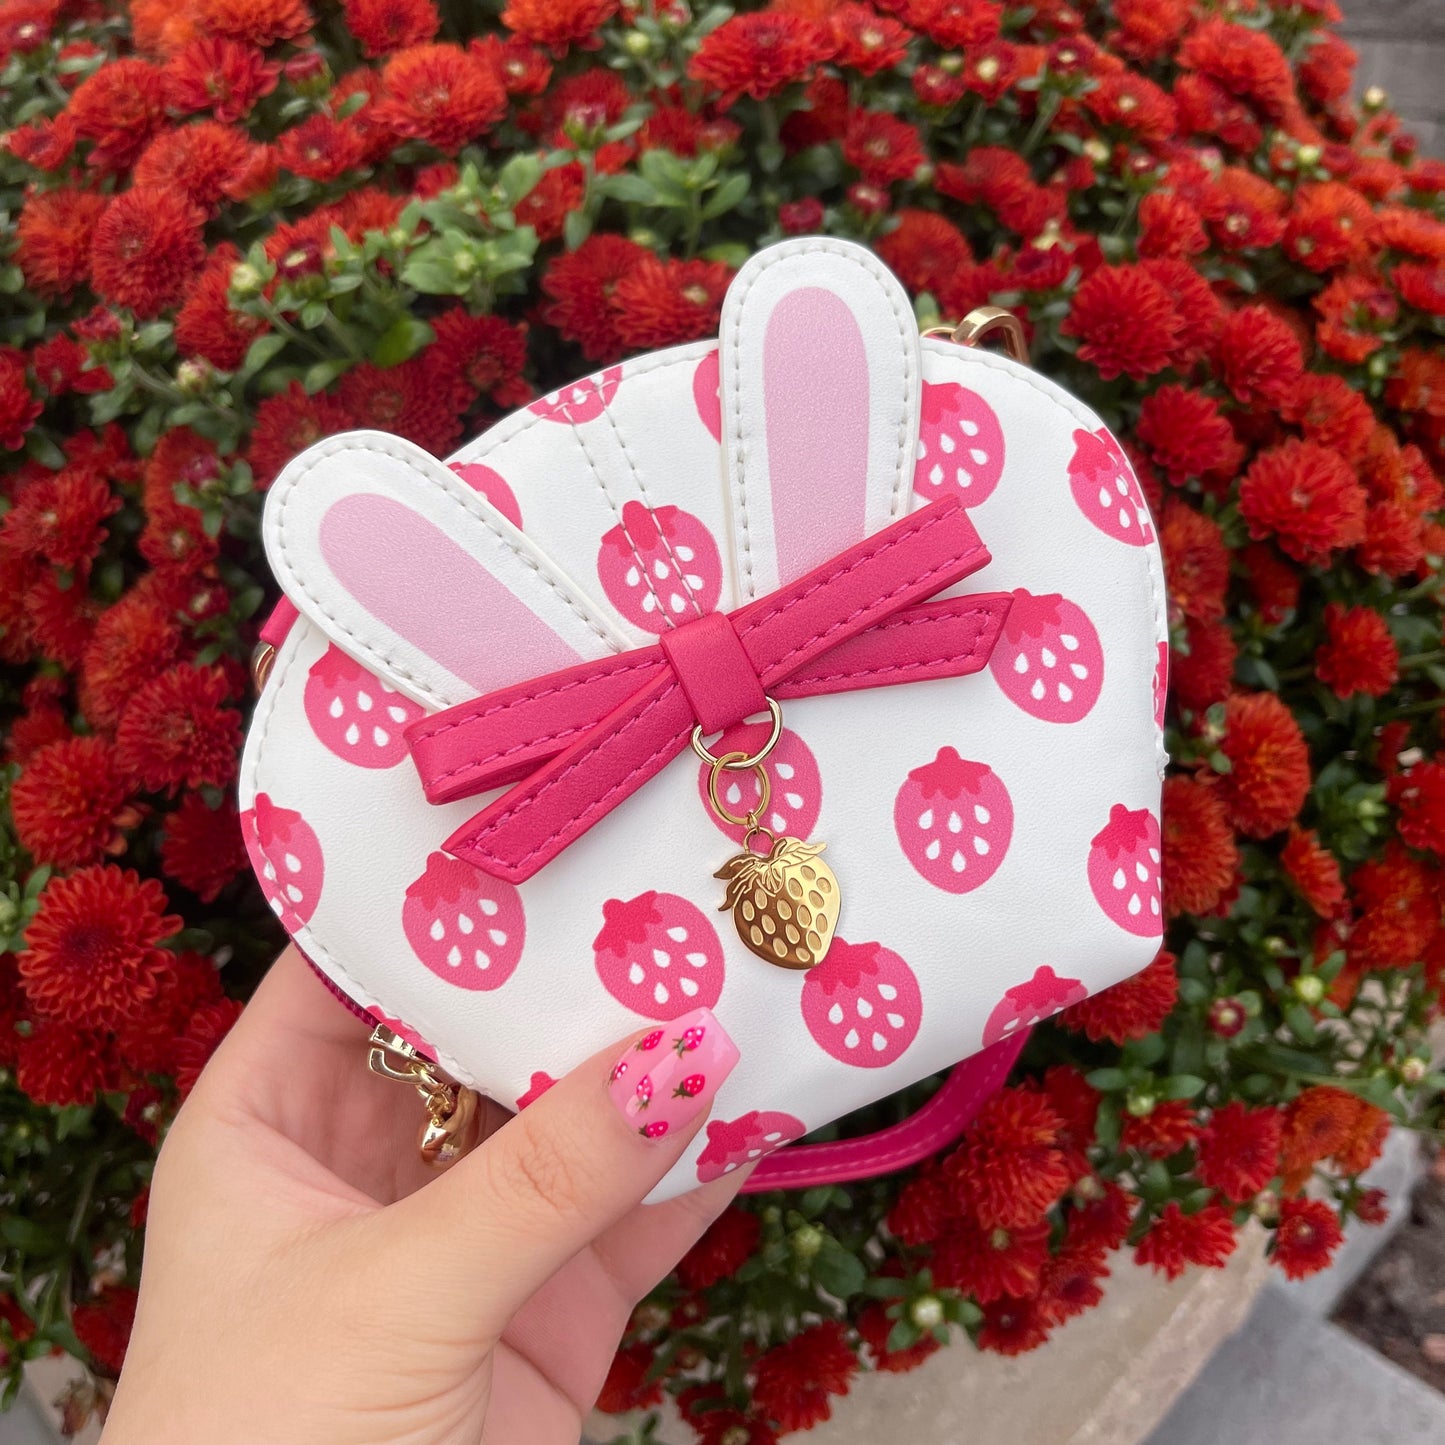 Mew Berry Inspired Bunny Coin Purse